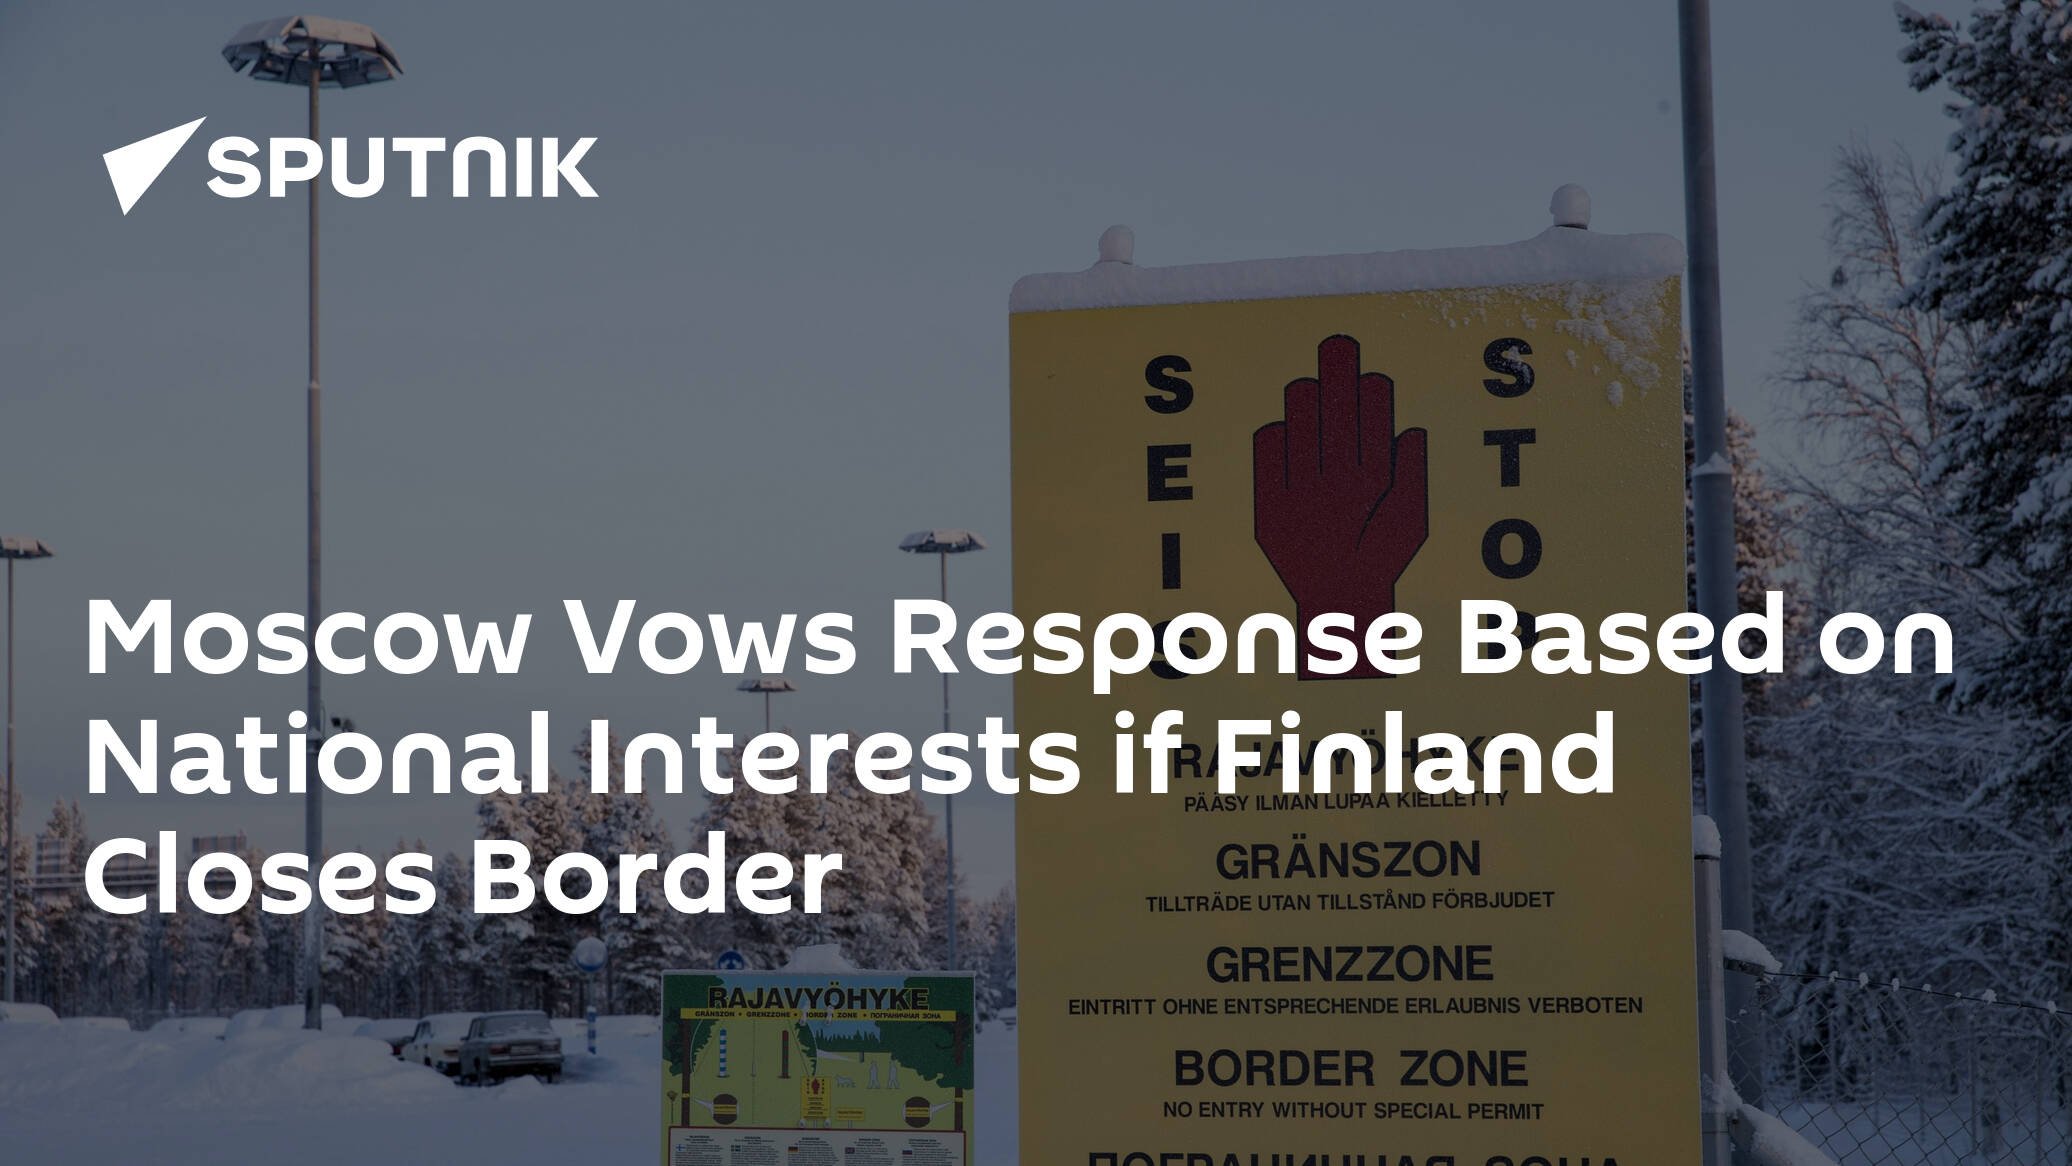 Moscow Vows Response Based on National Interests if Finland Closes Border